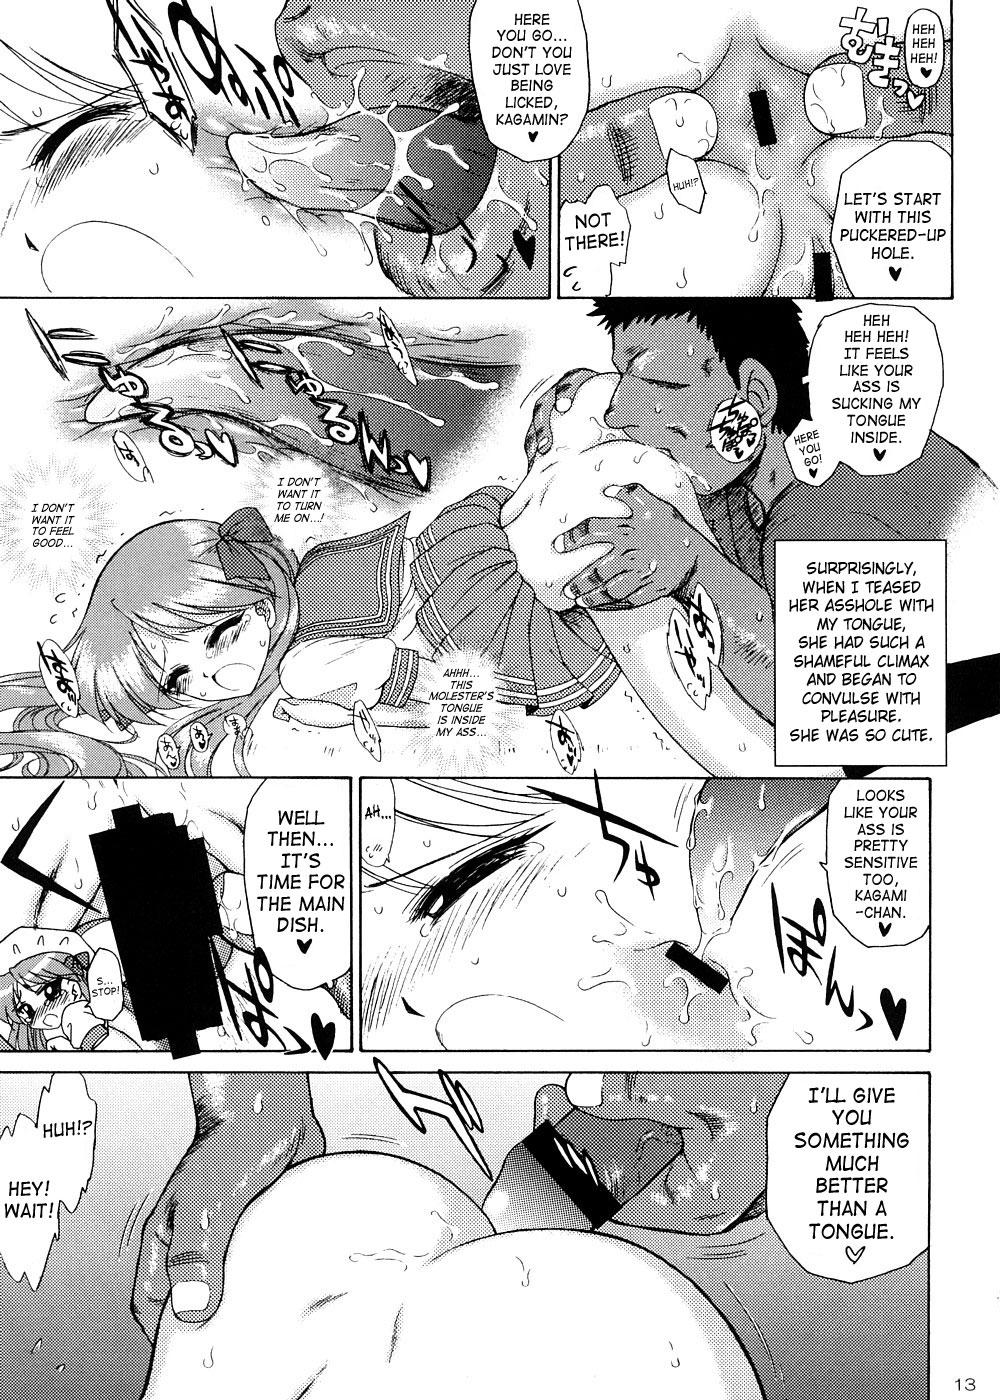 Best Blowjobs Man in the Mirror - Lucky star Fisting - Page 12